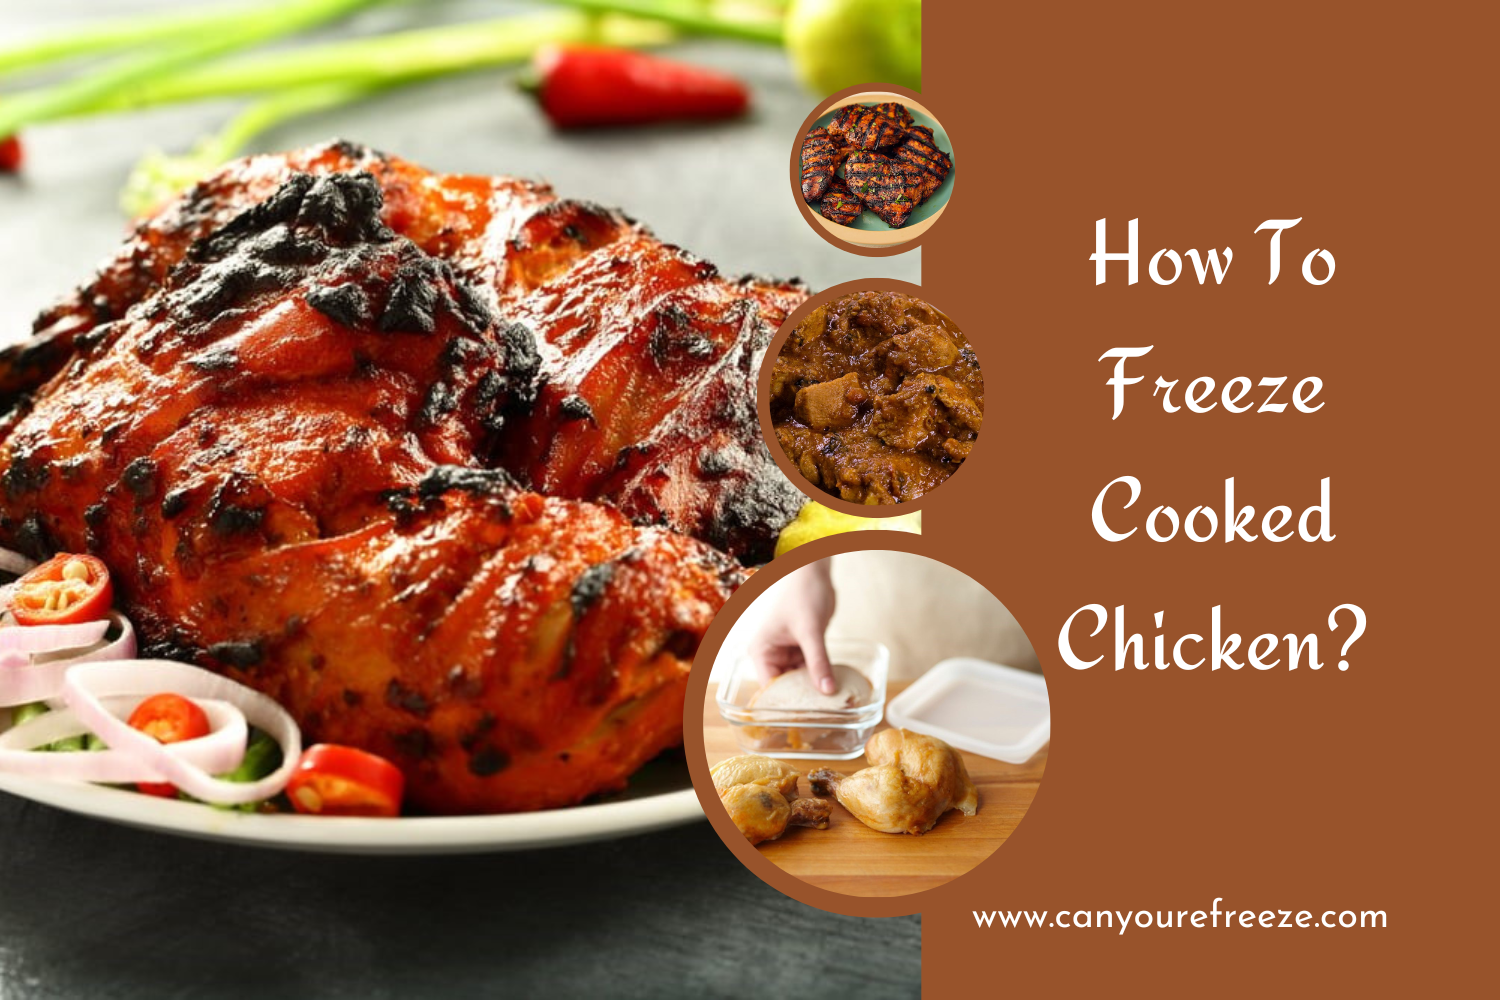 How To Freeze Cooked Chicken